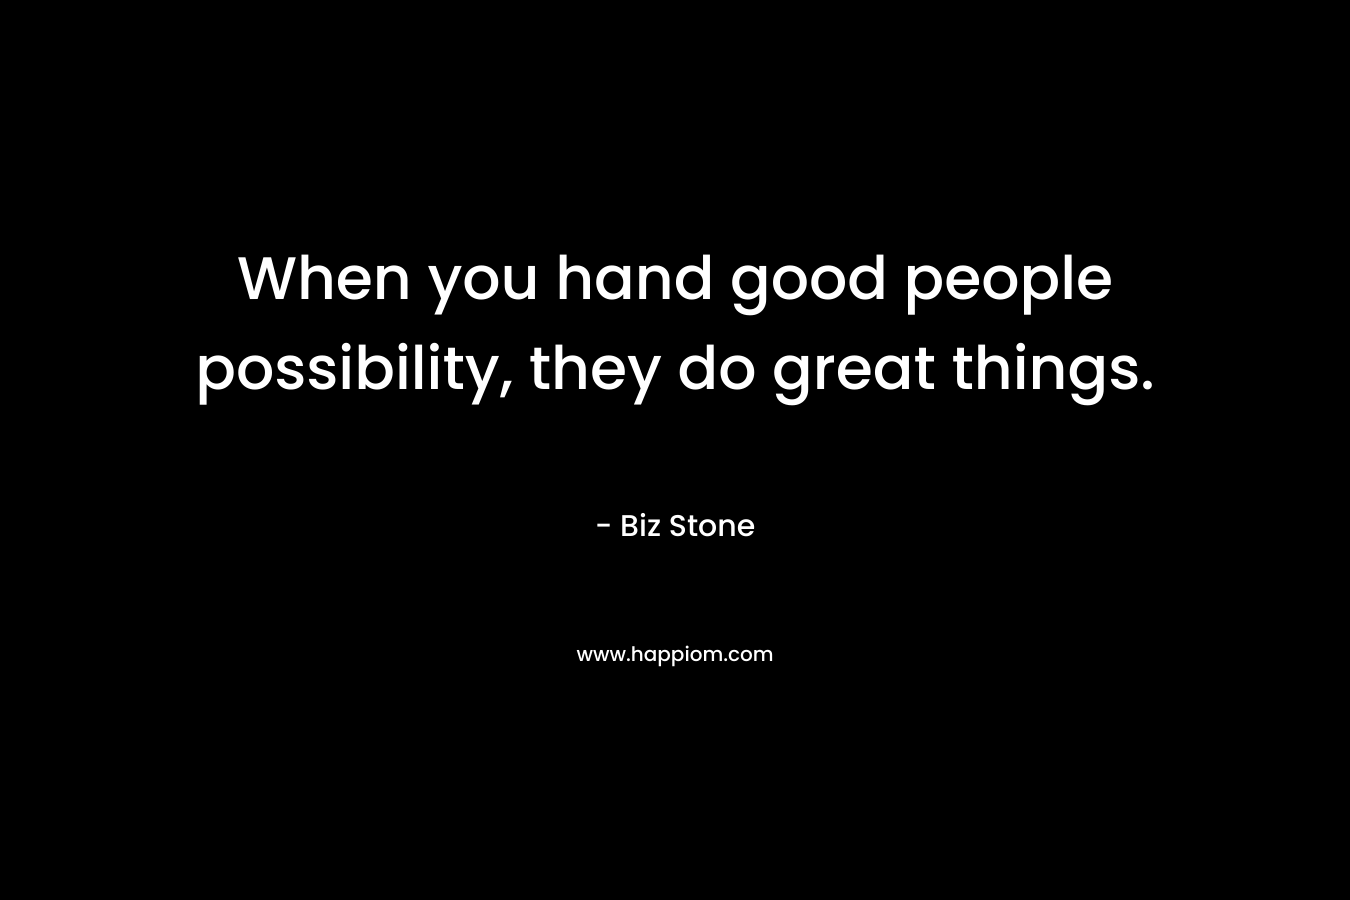 When you hand good people possibility, they do great things.